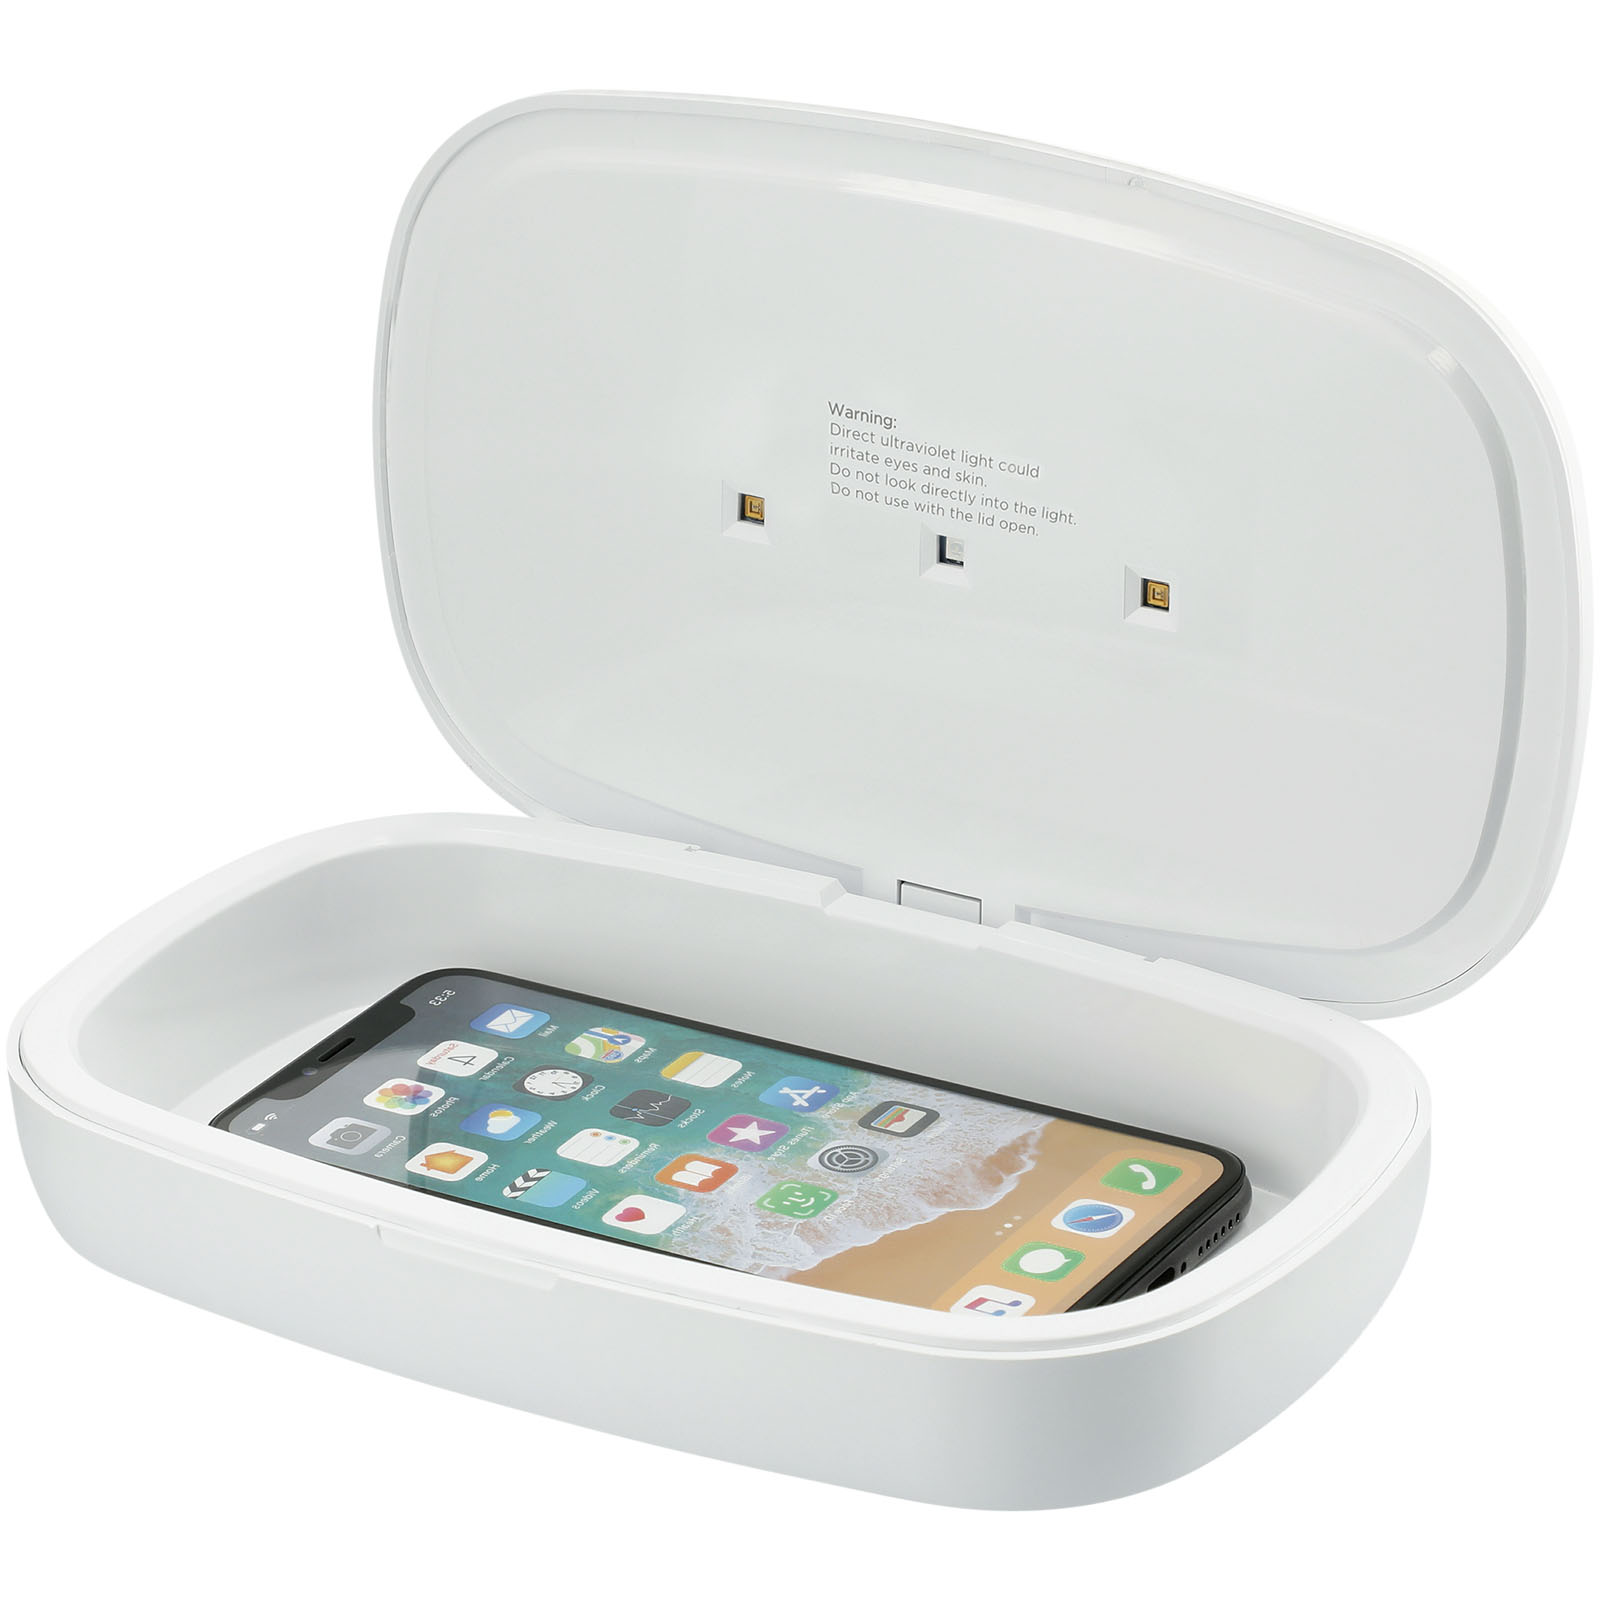 Plastic UV-C disinfectant case SYLVANIA with wireless charger - white